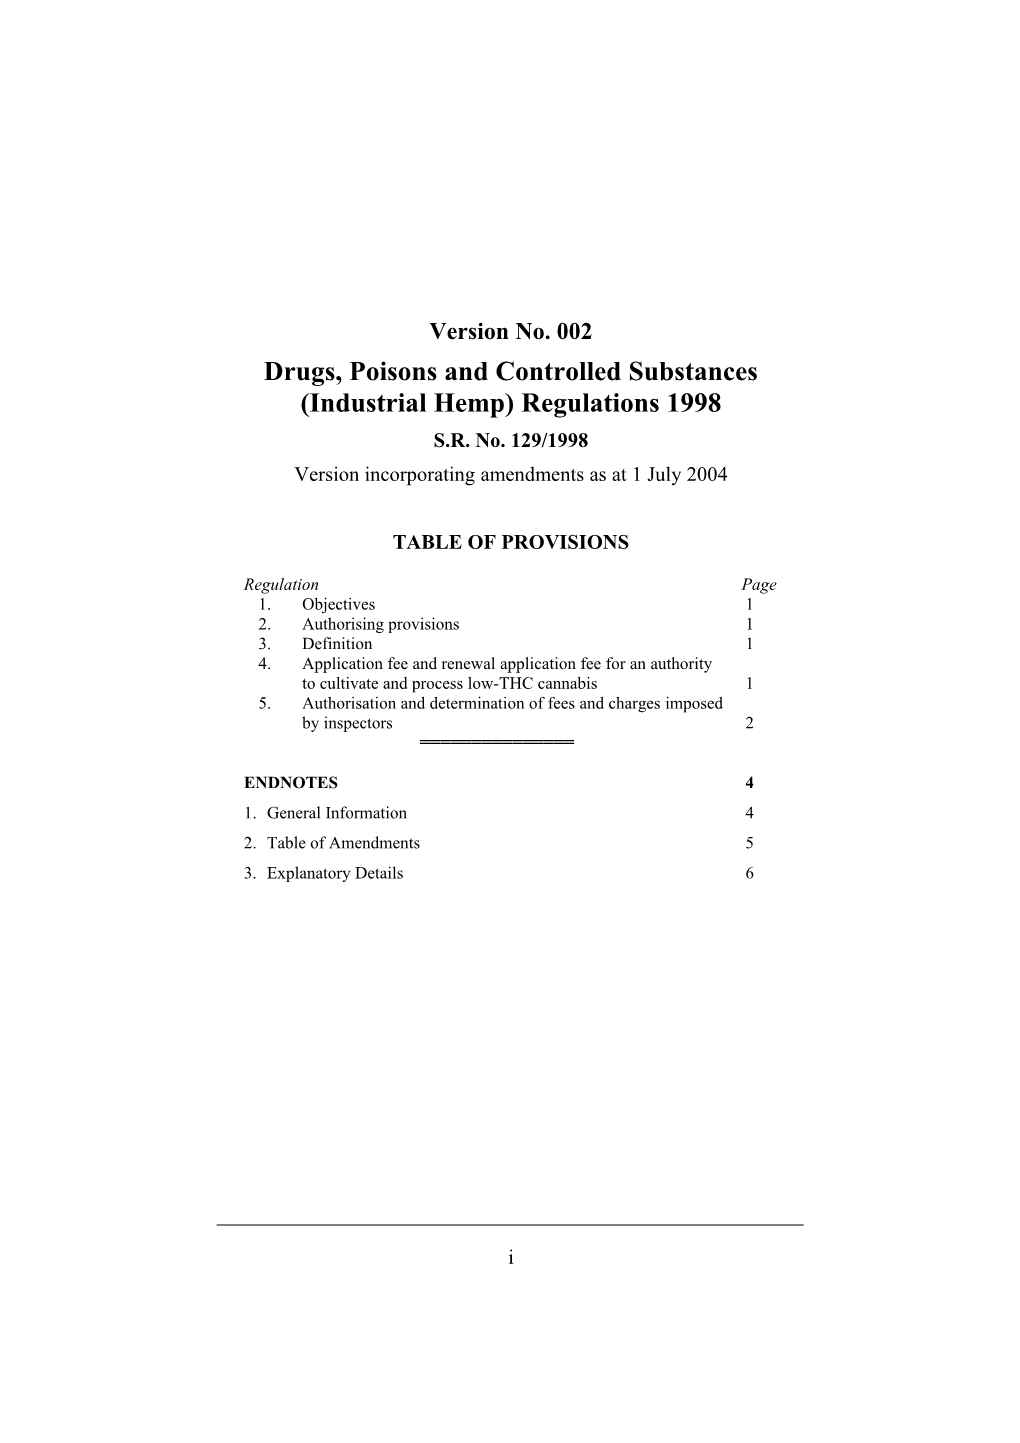 Drugs, Poisons and Controlled Substances (Industrial Hemp) Regulations 1998